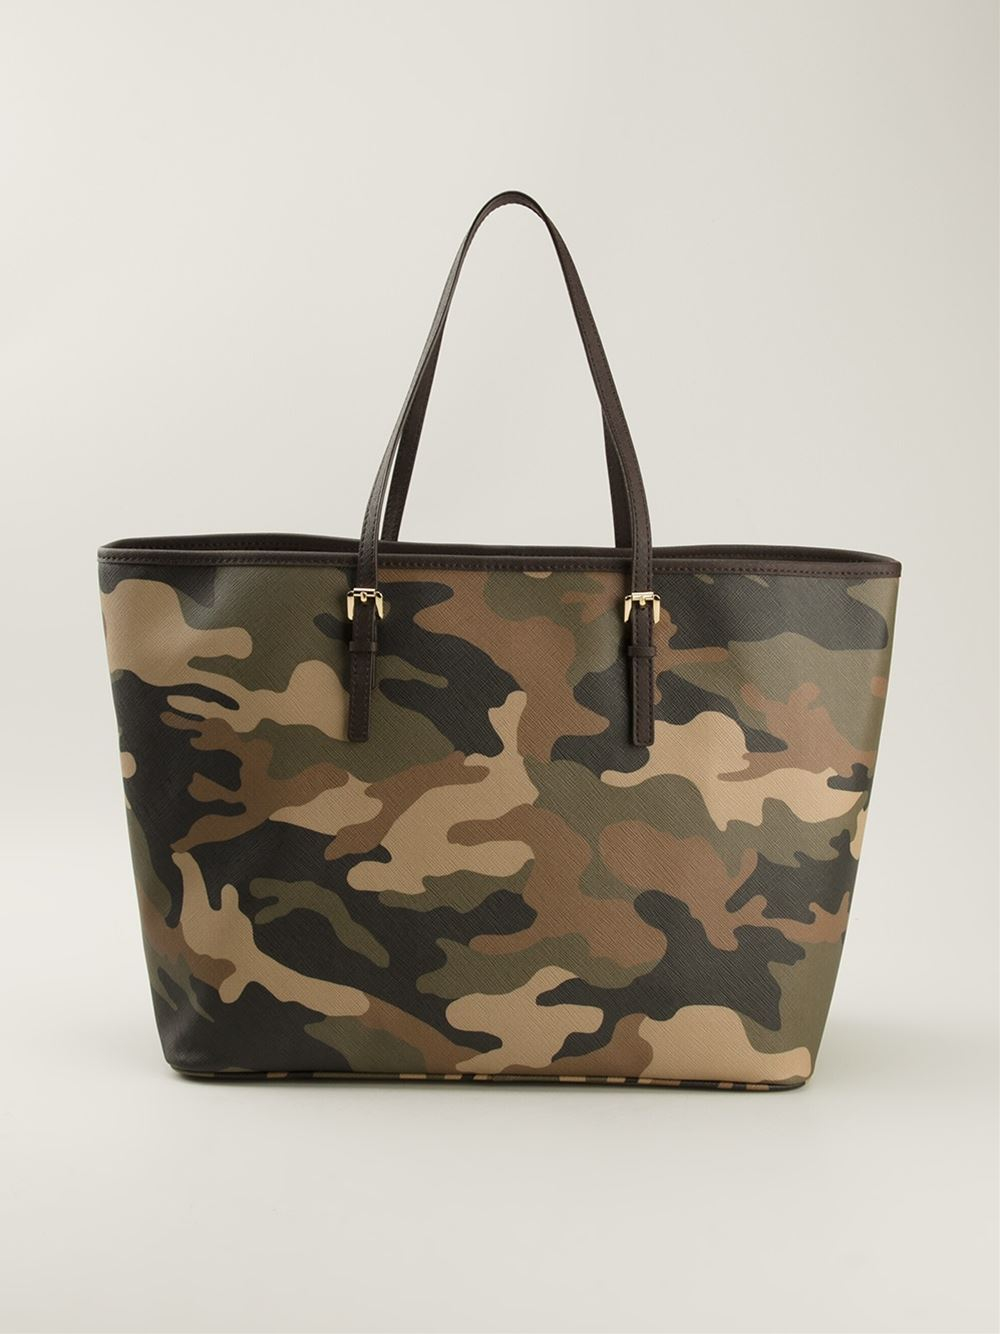 Michael Kors Army Tote Bags for Women